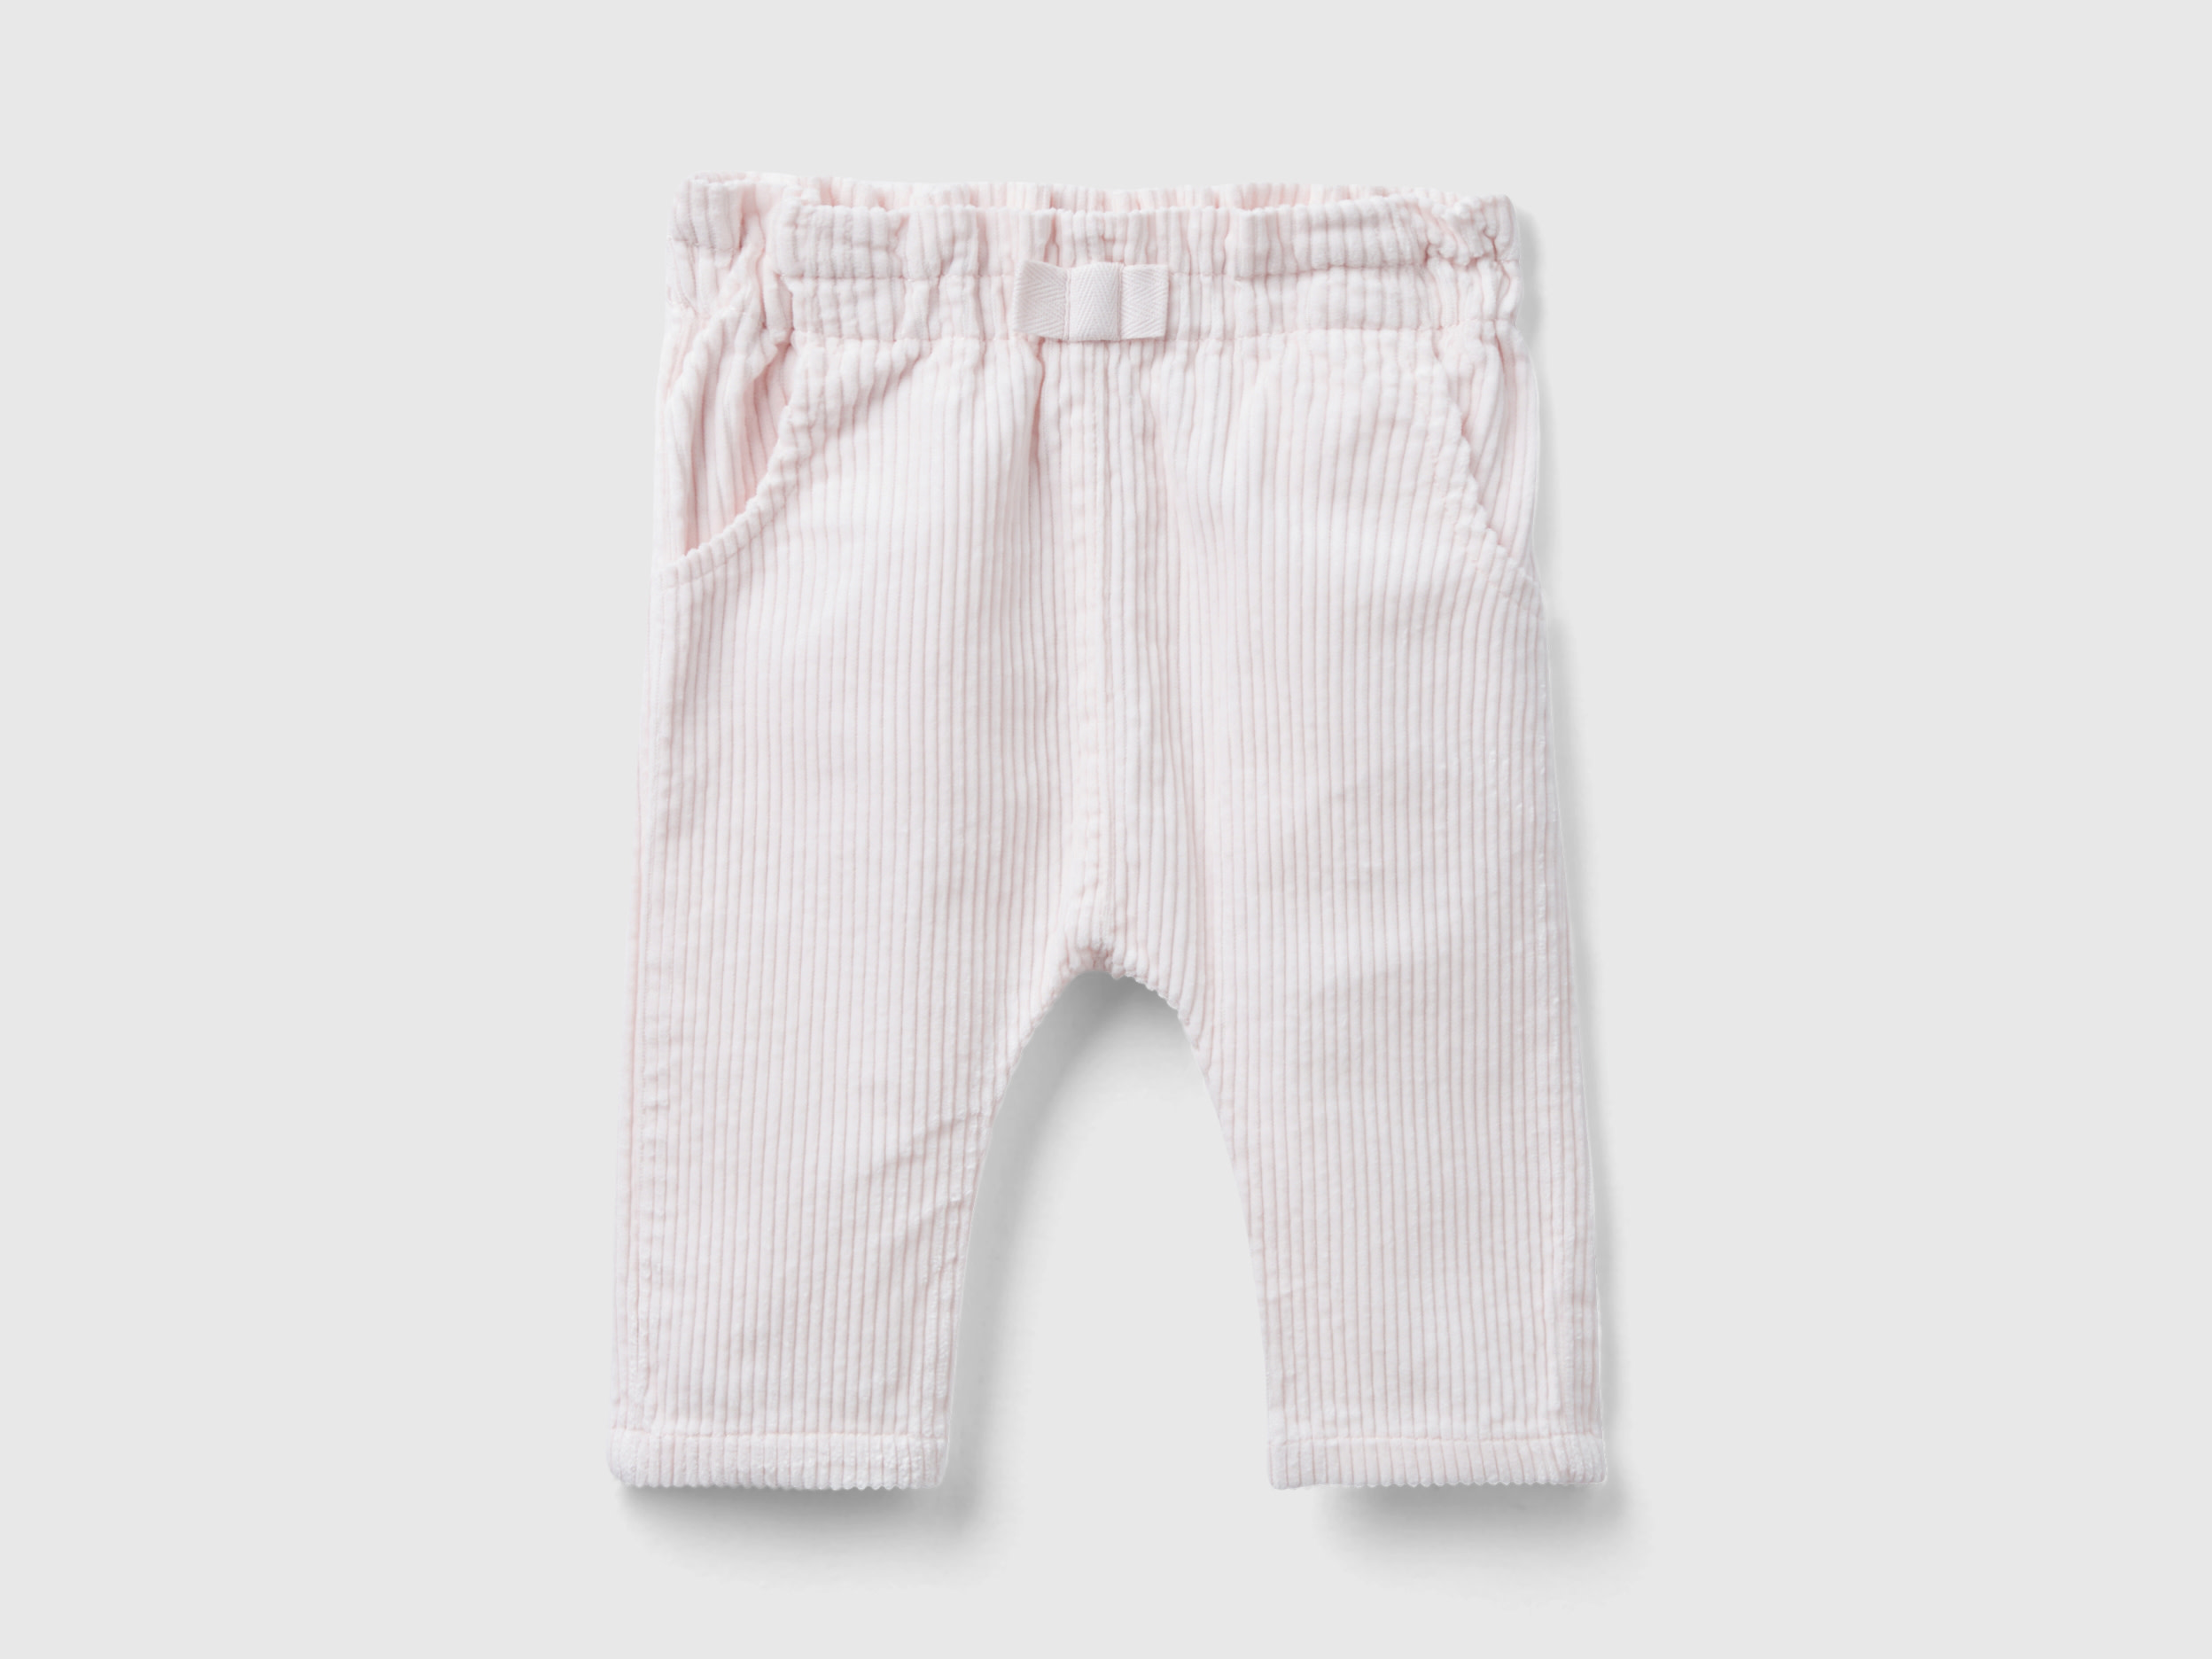 Benetton, Paperbag Corduroy Trousers, size 12-18, Soft Pink, Kids